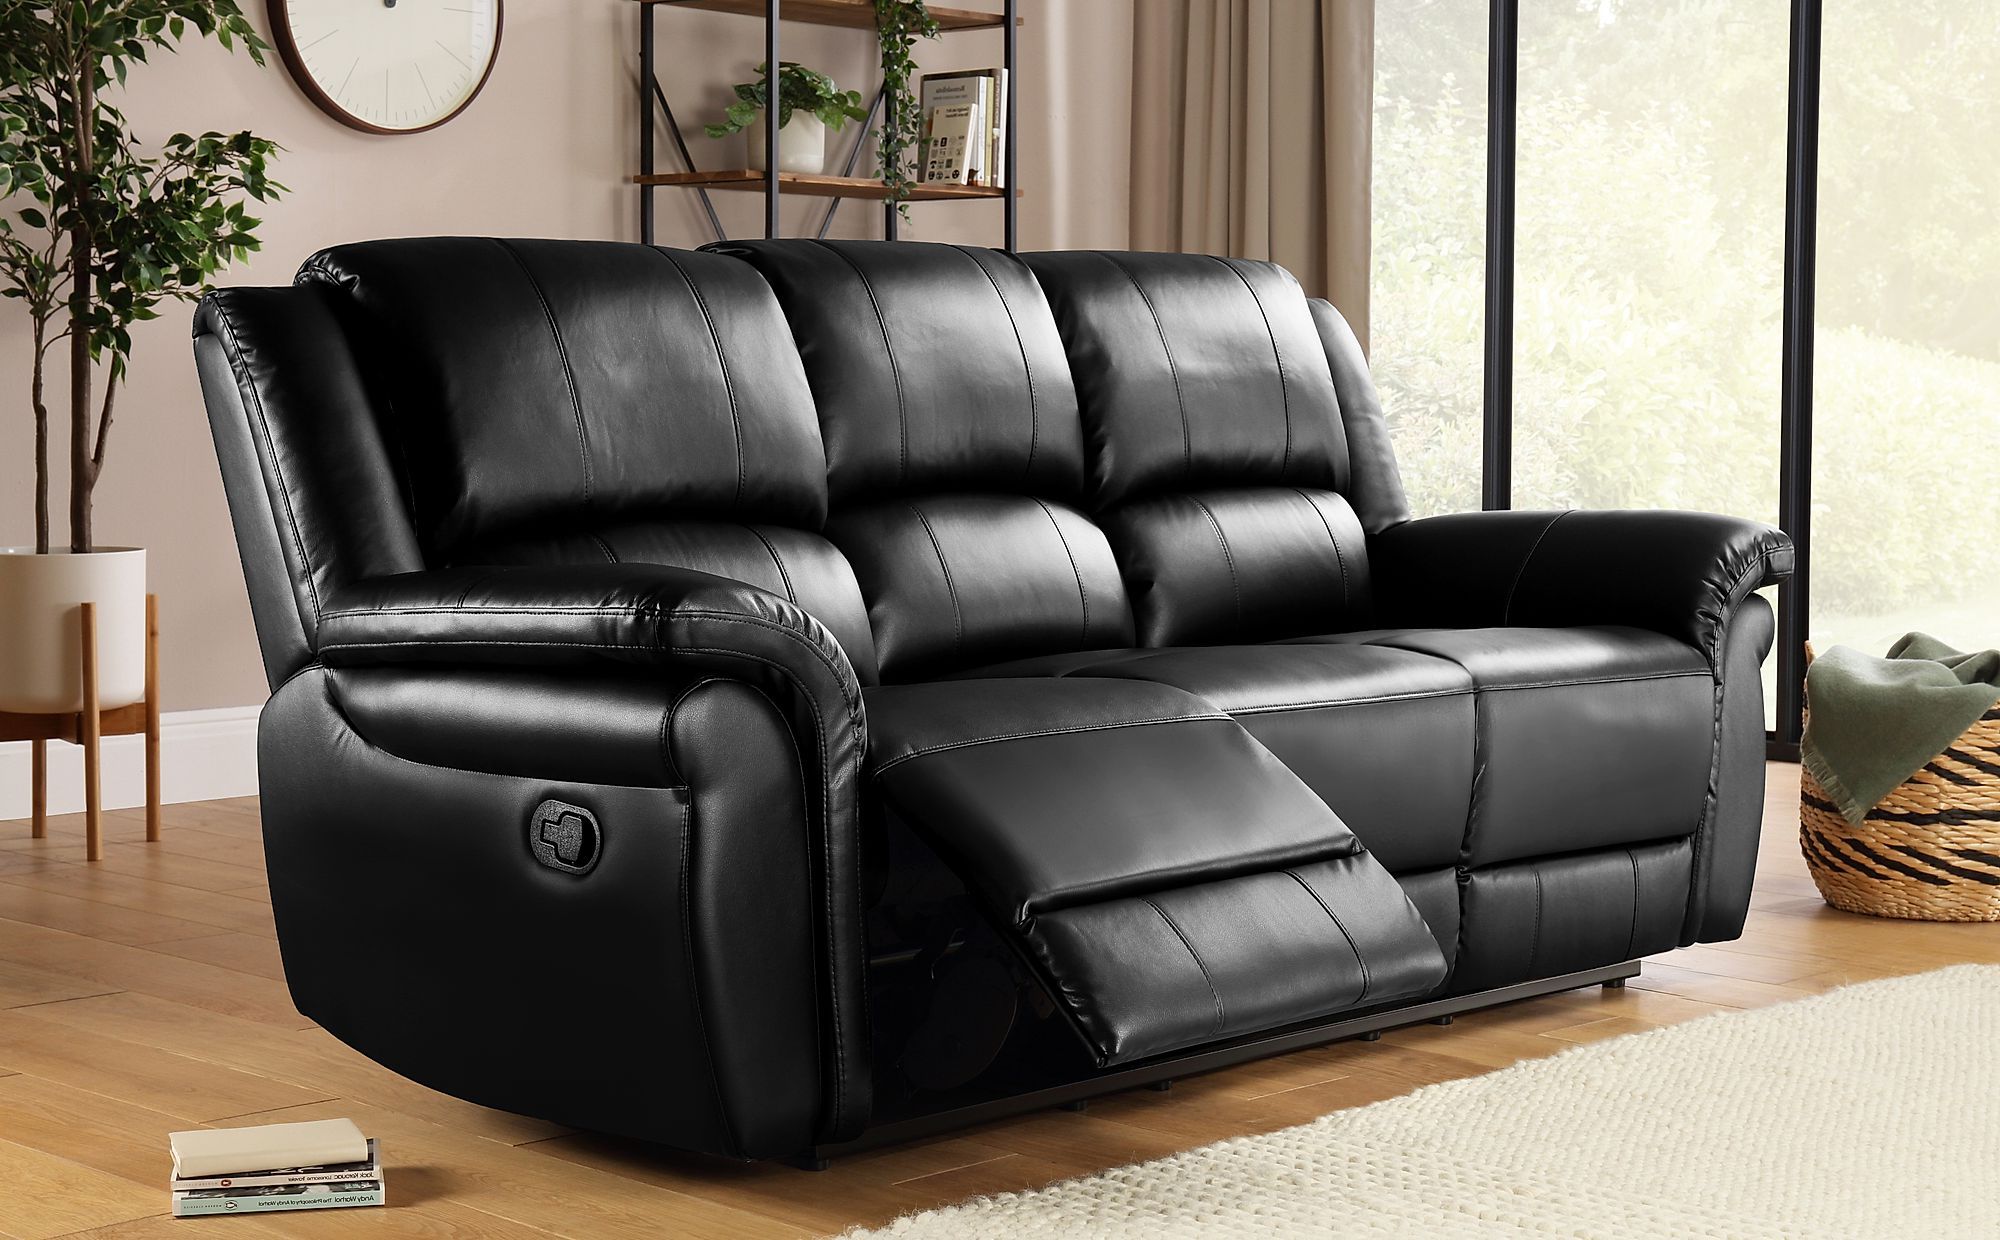 Lombard Black Leather 3 Seater Recliner Sofa | Furniture Choice Intended For 3 Seat L Shaped Sofas In Black (View 12 of 20)